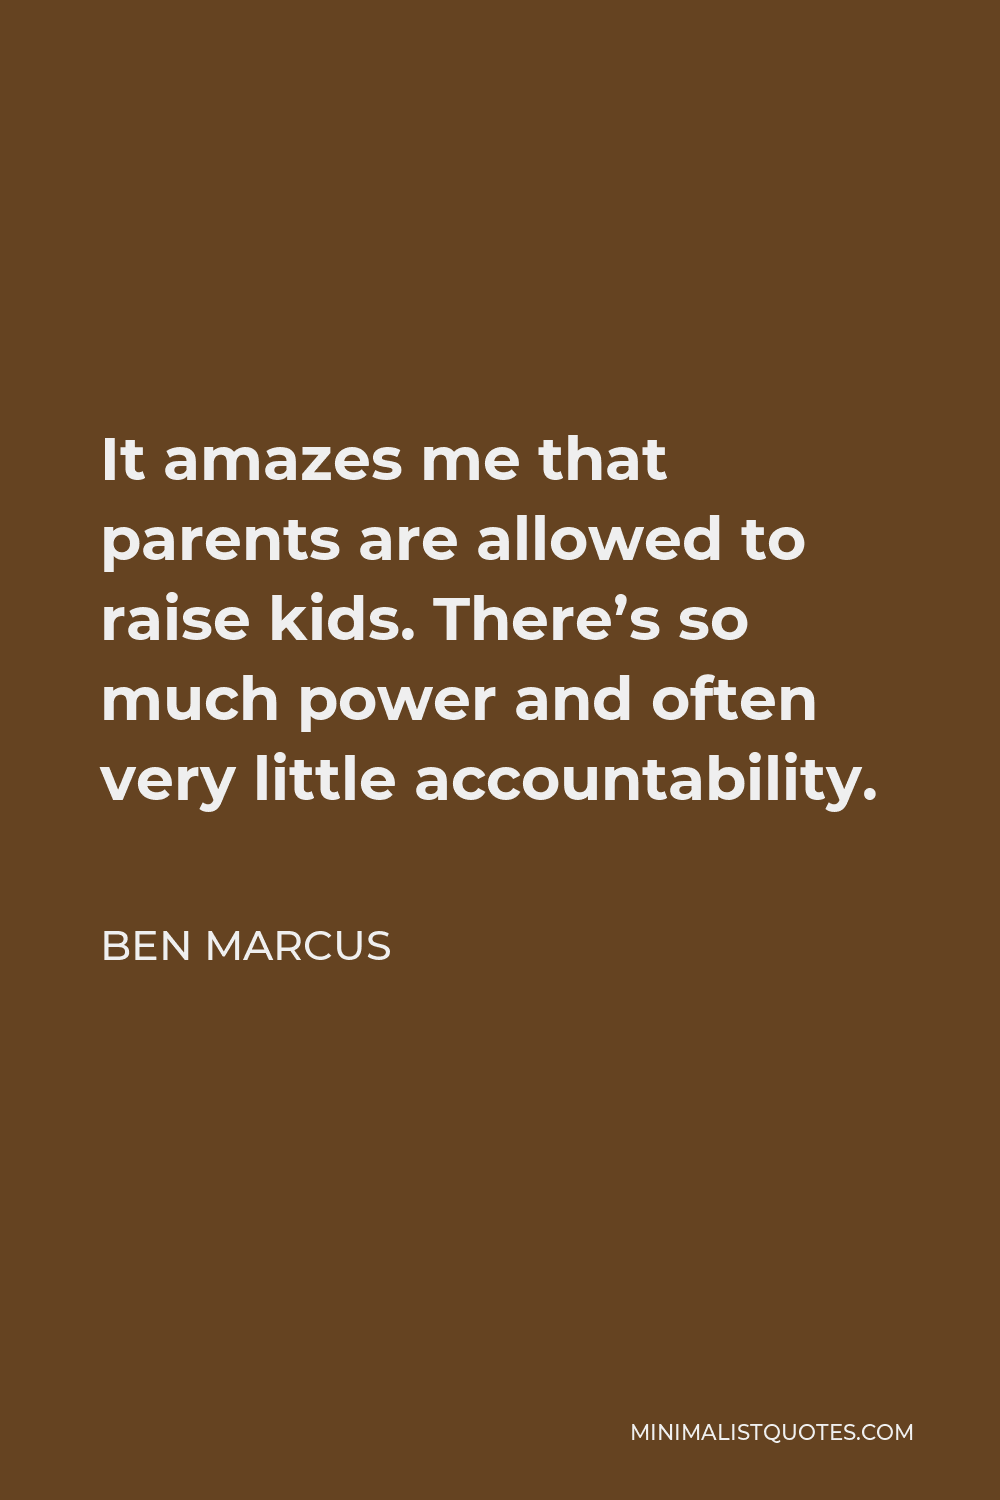 Ben Marcus Quote - It amazes me that parents are allowed to raise kids. There’s so much power and often very little accountability.